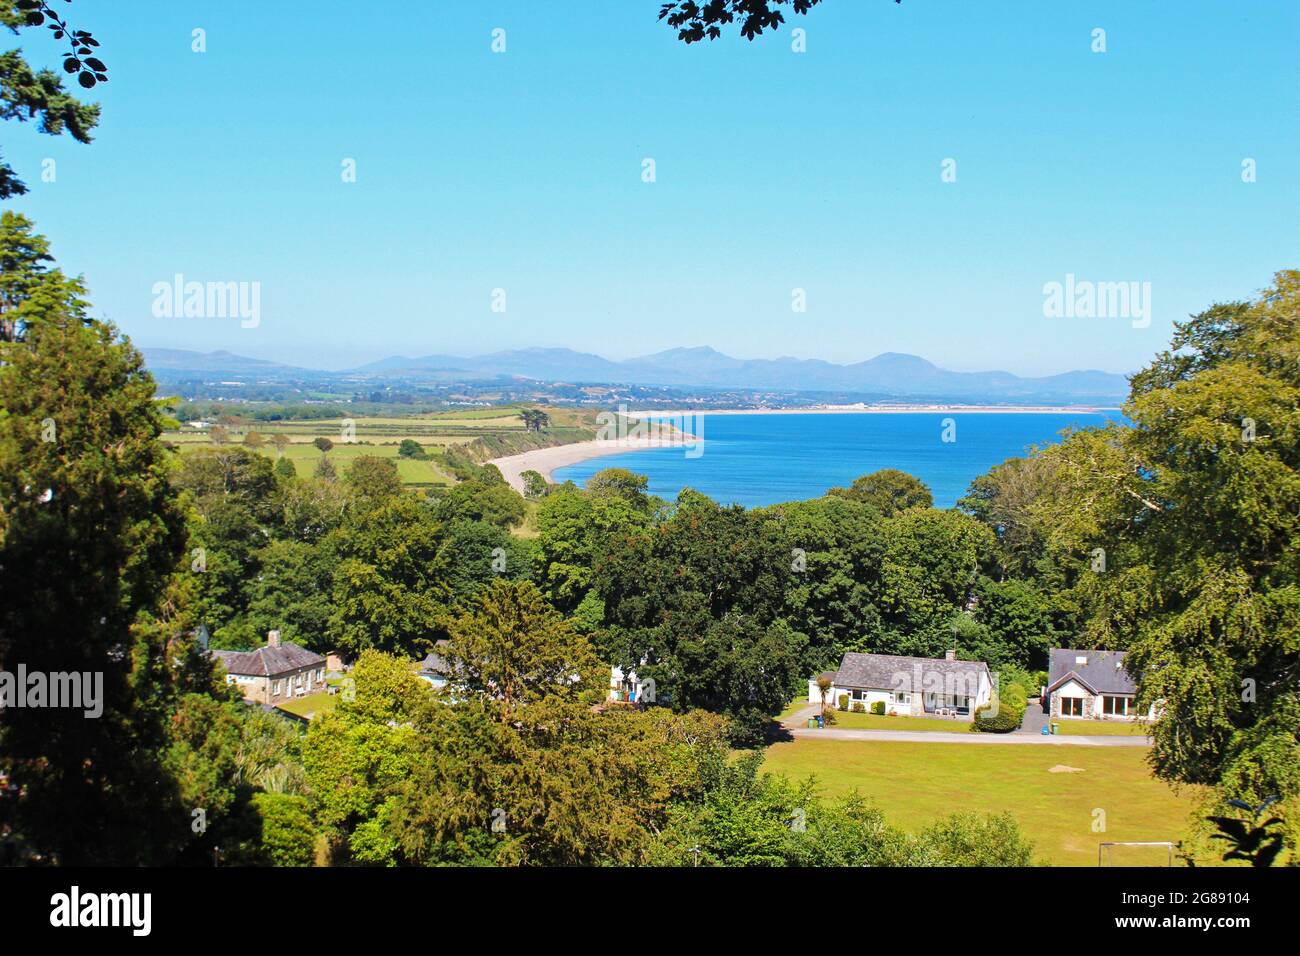 Views, landscape and scenery of Llandbedrog beach and countryside with blue sky in Llanbedrog, North Wales Stock Photo